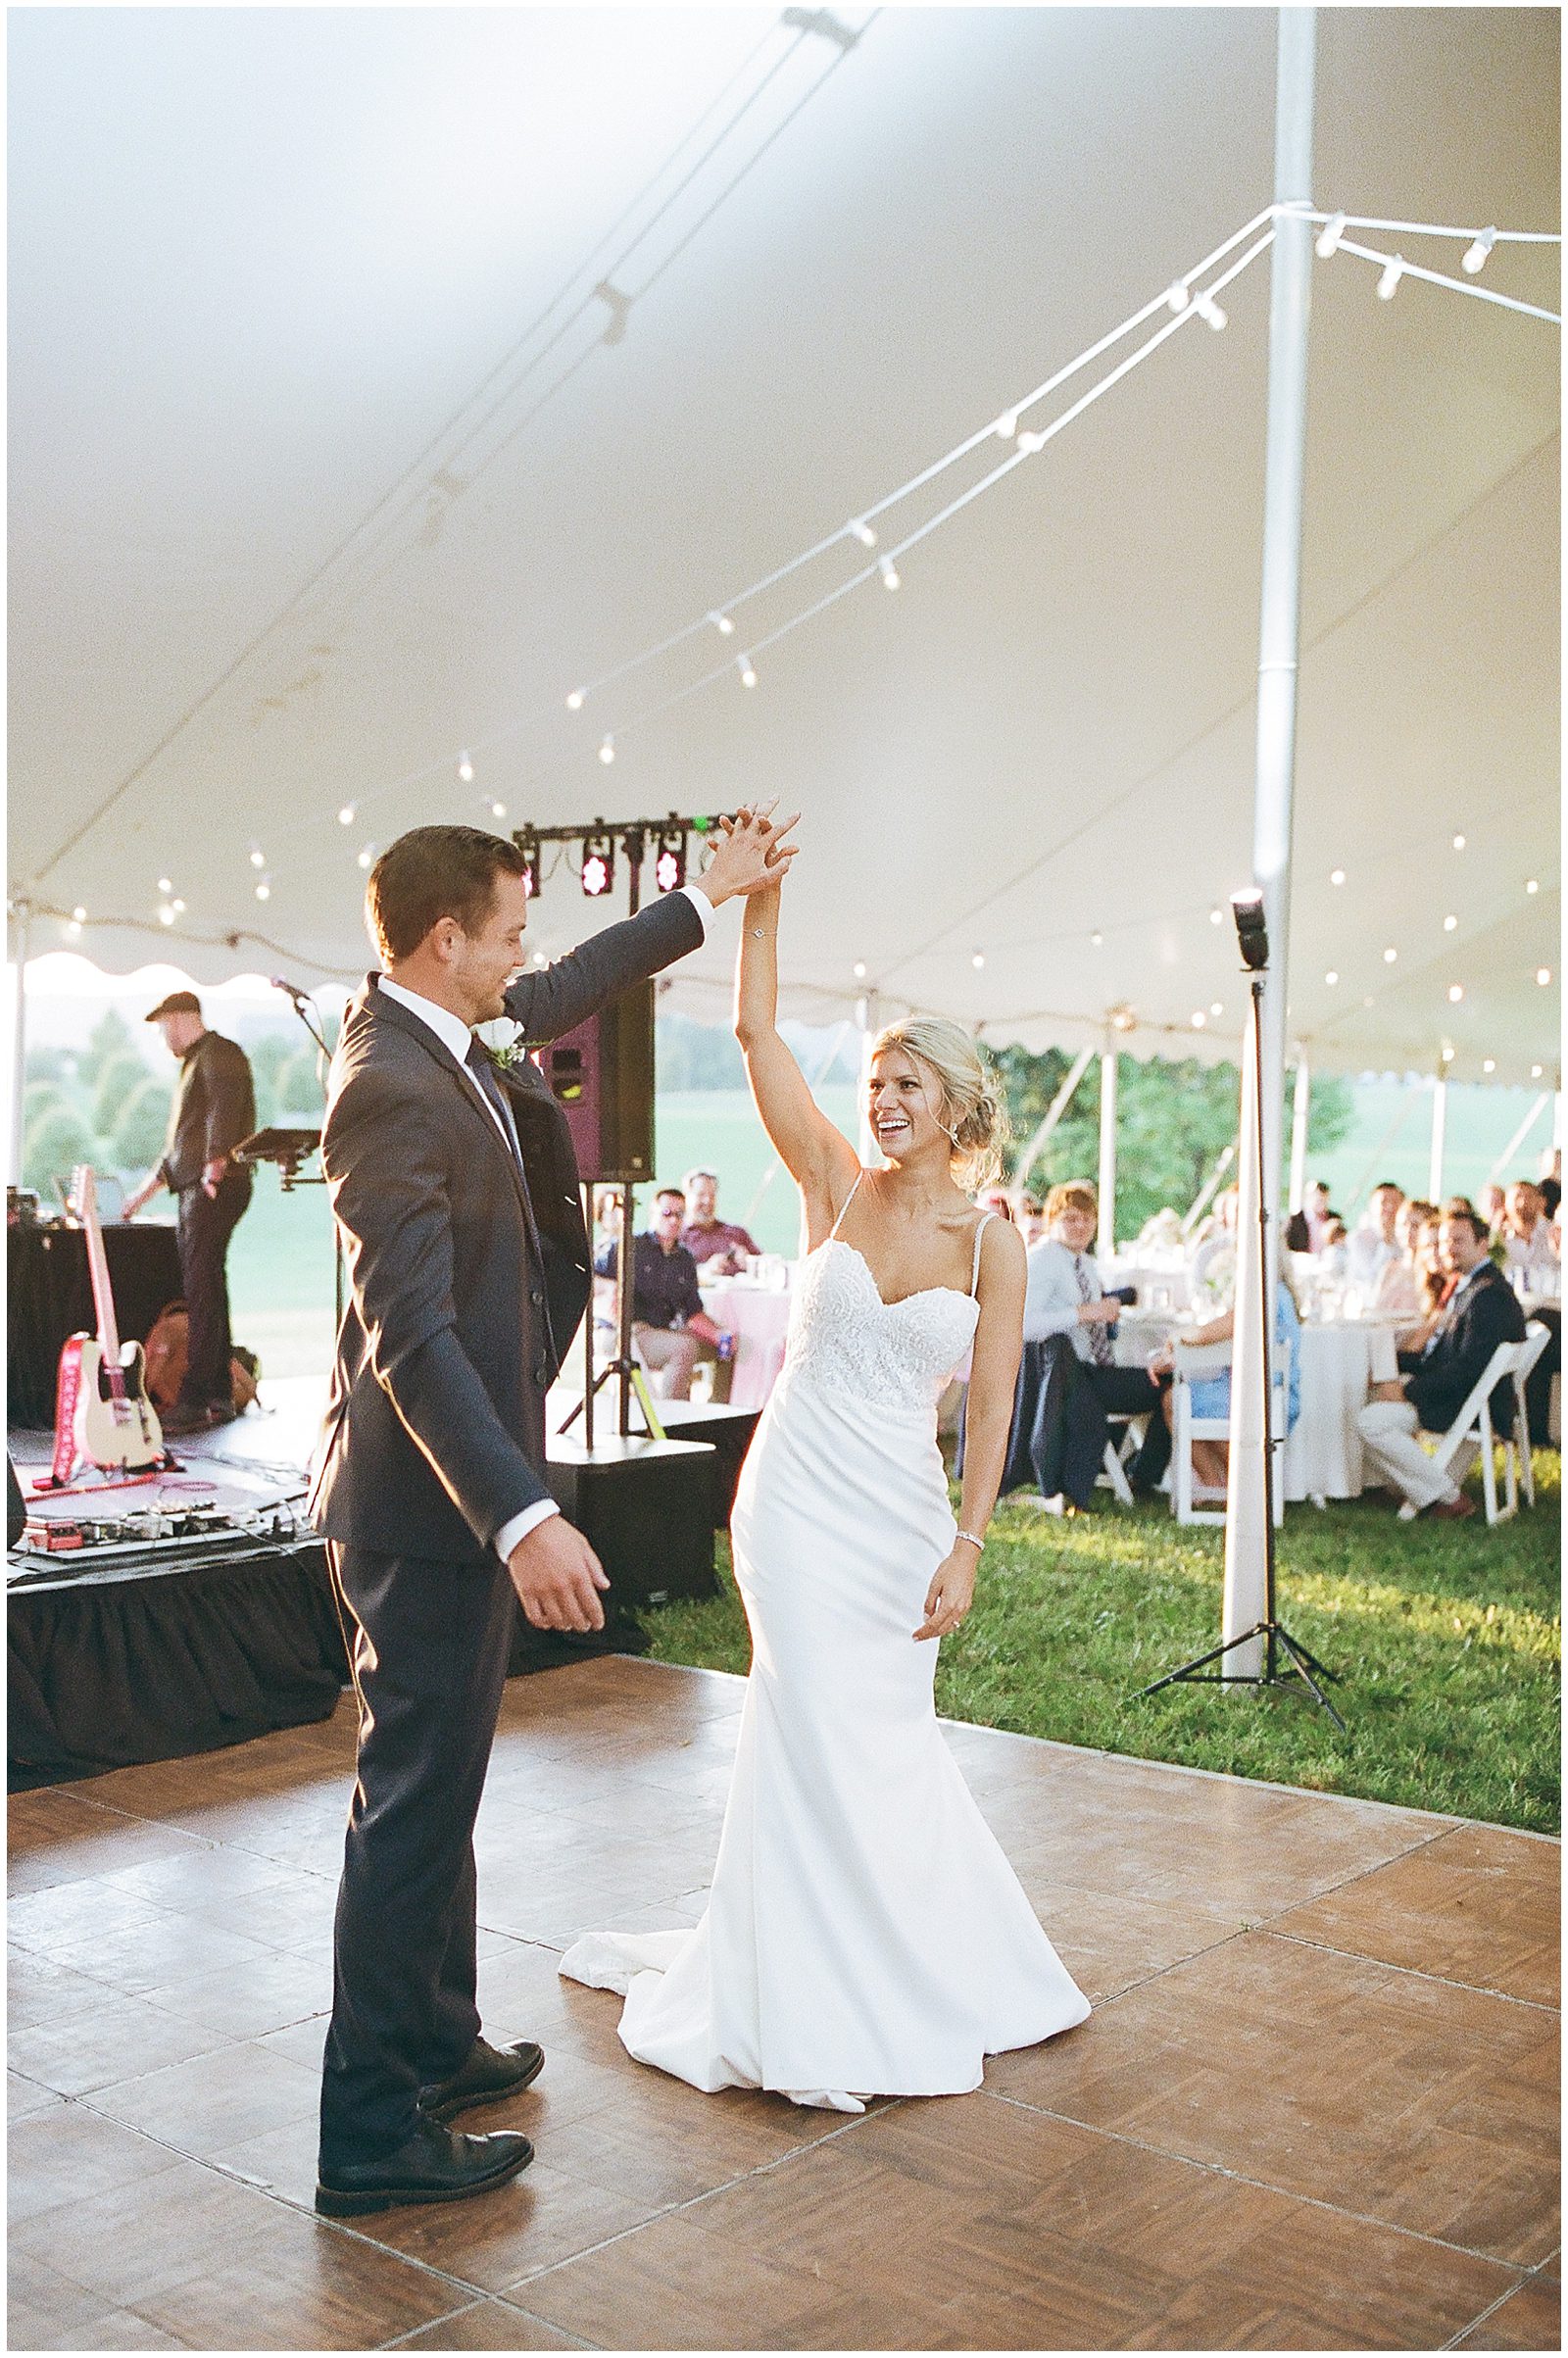 Bride and Groom First Dance at Wedding Reception Photo